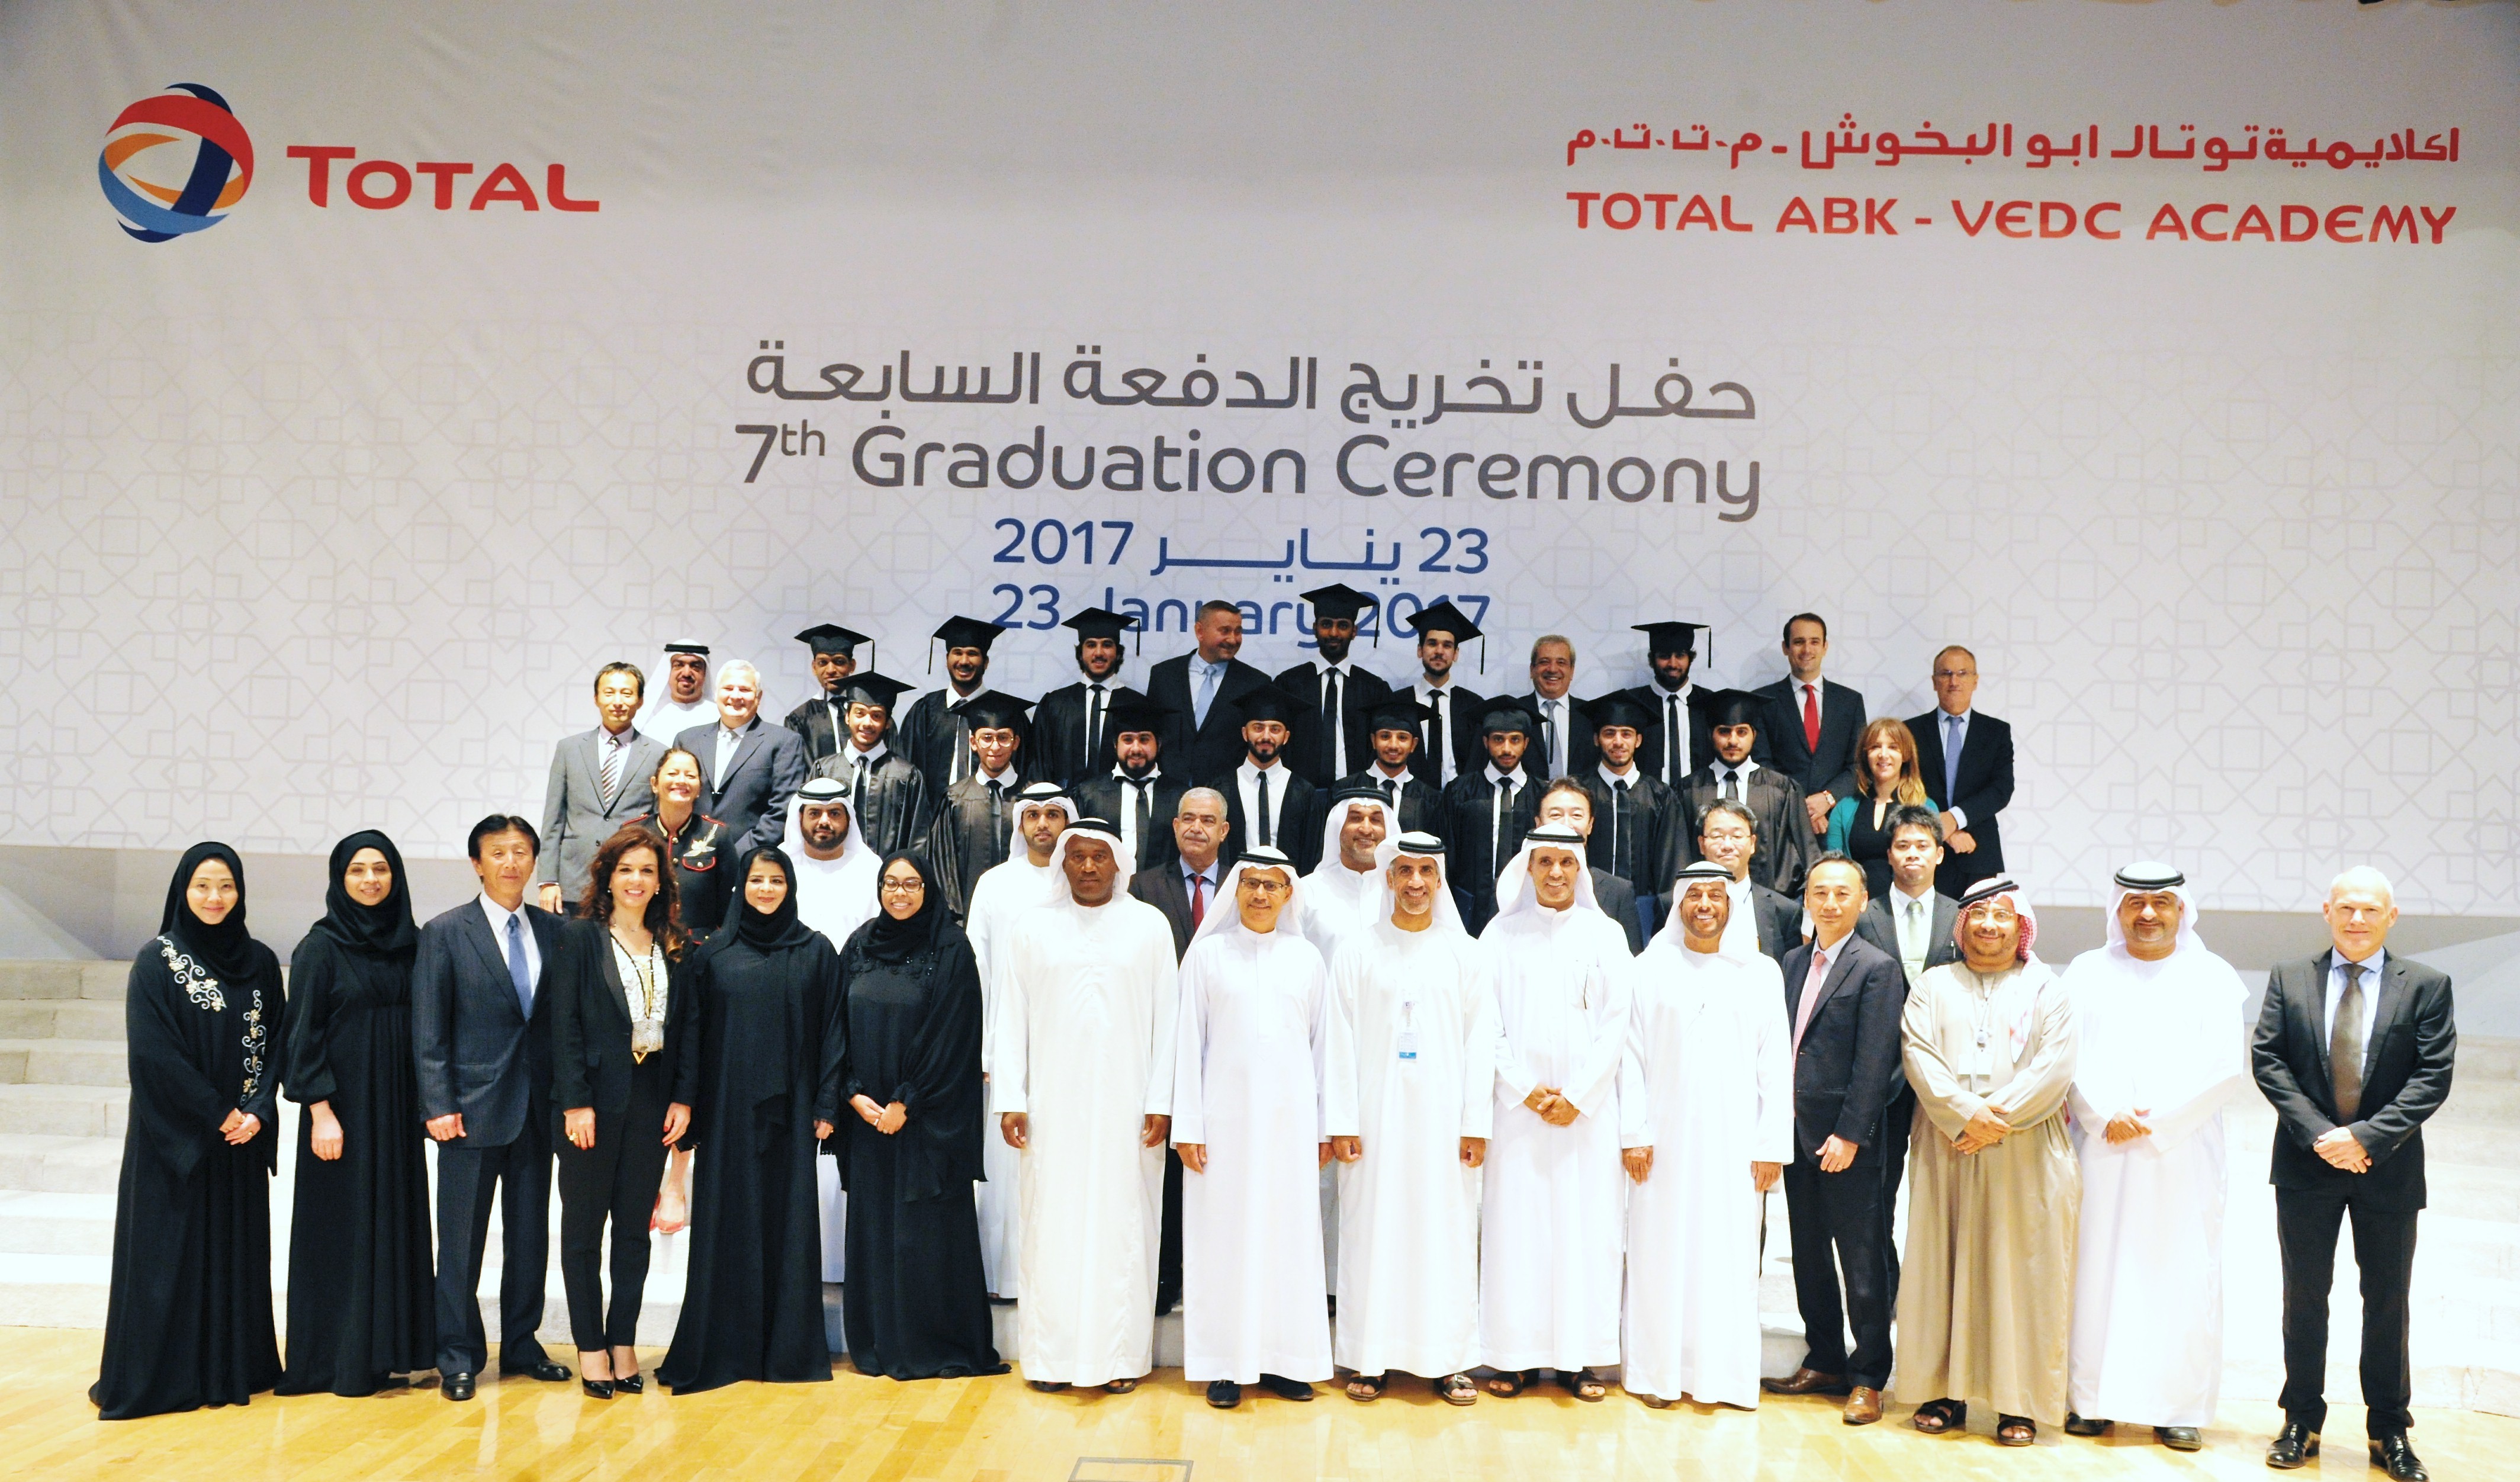 TOTAL ABK – VEDC Academy 7th Graduation Ceremony